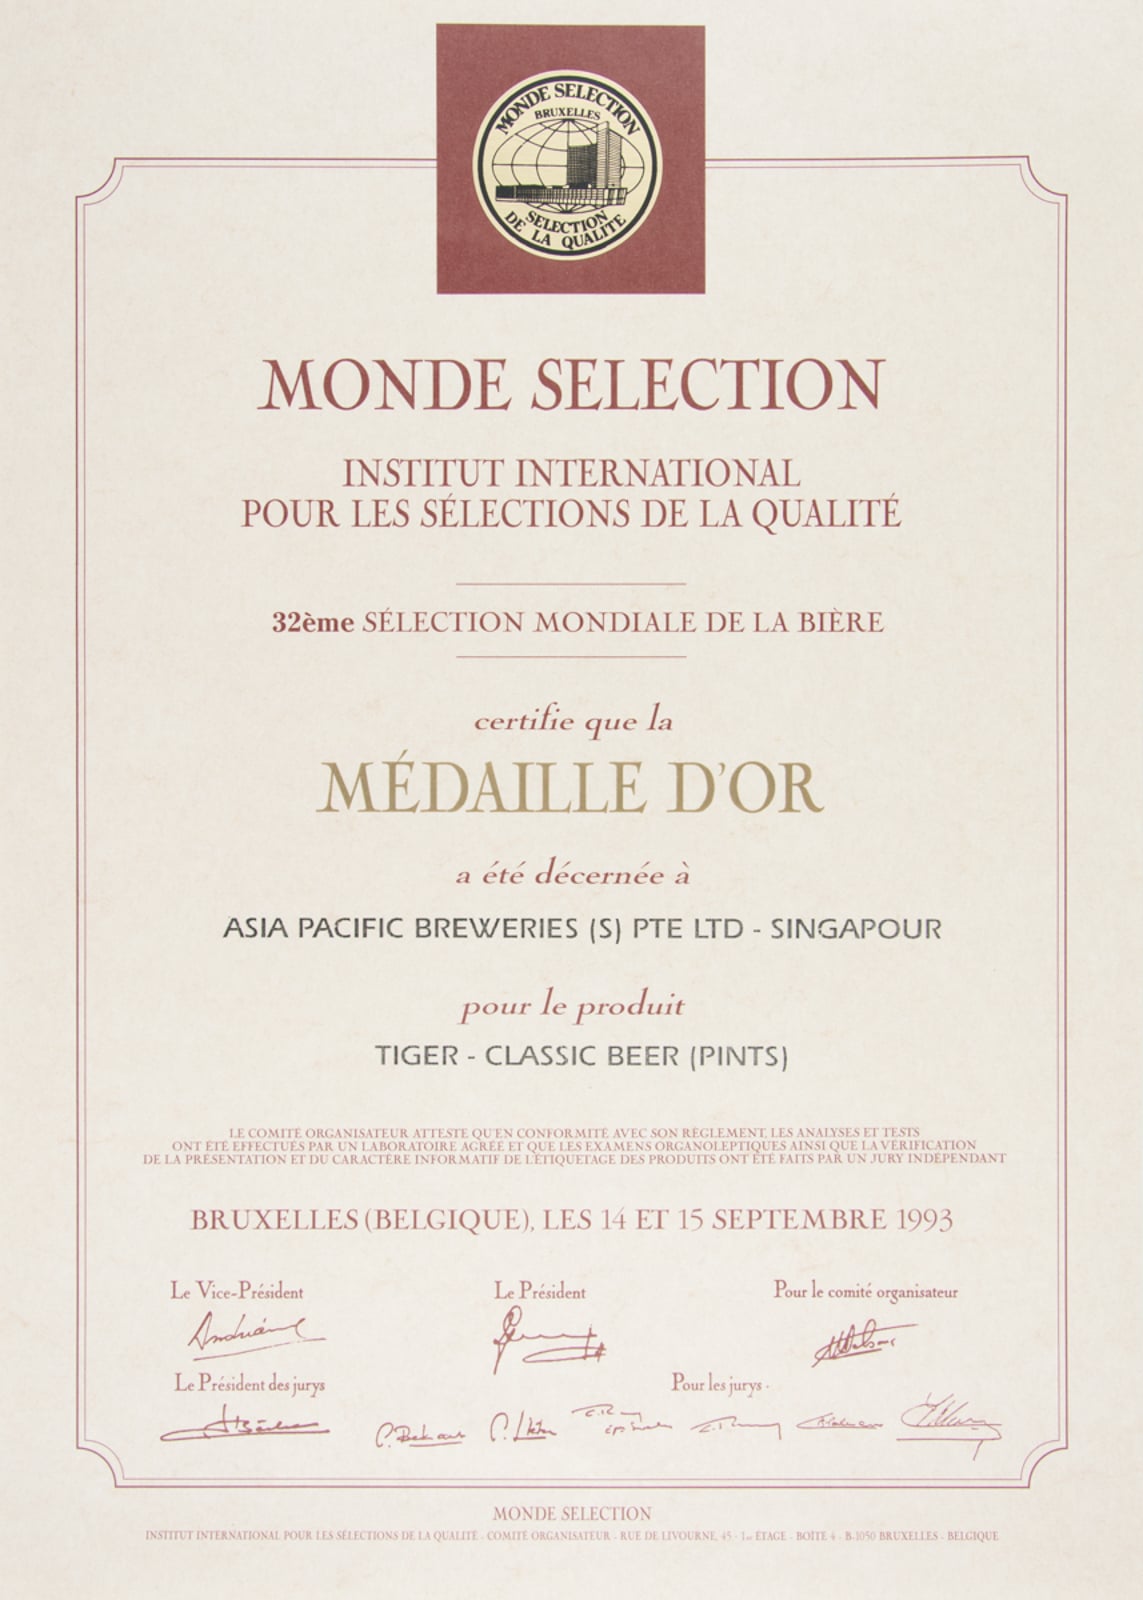 Tiger - Classic Beer (Pints) Médaille d'Or, Monde Selection Certificate 1993